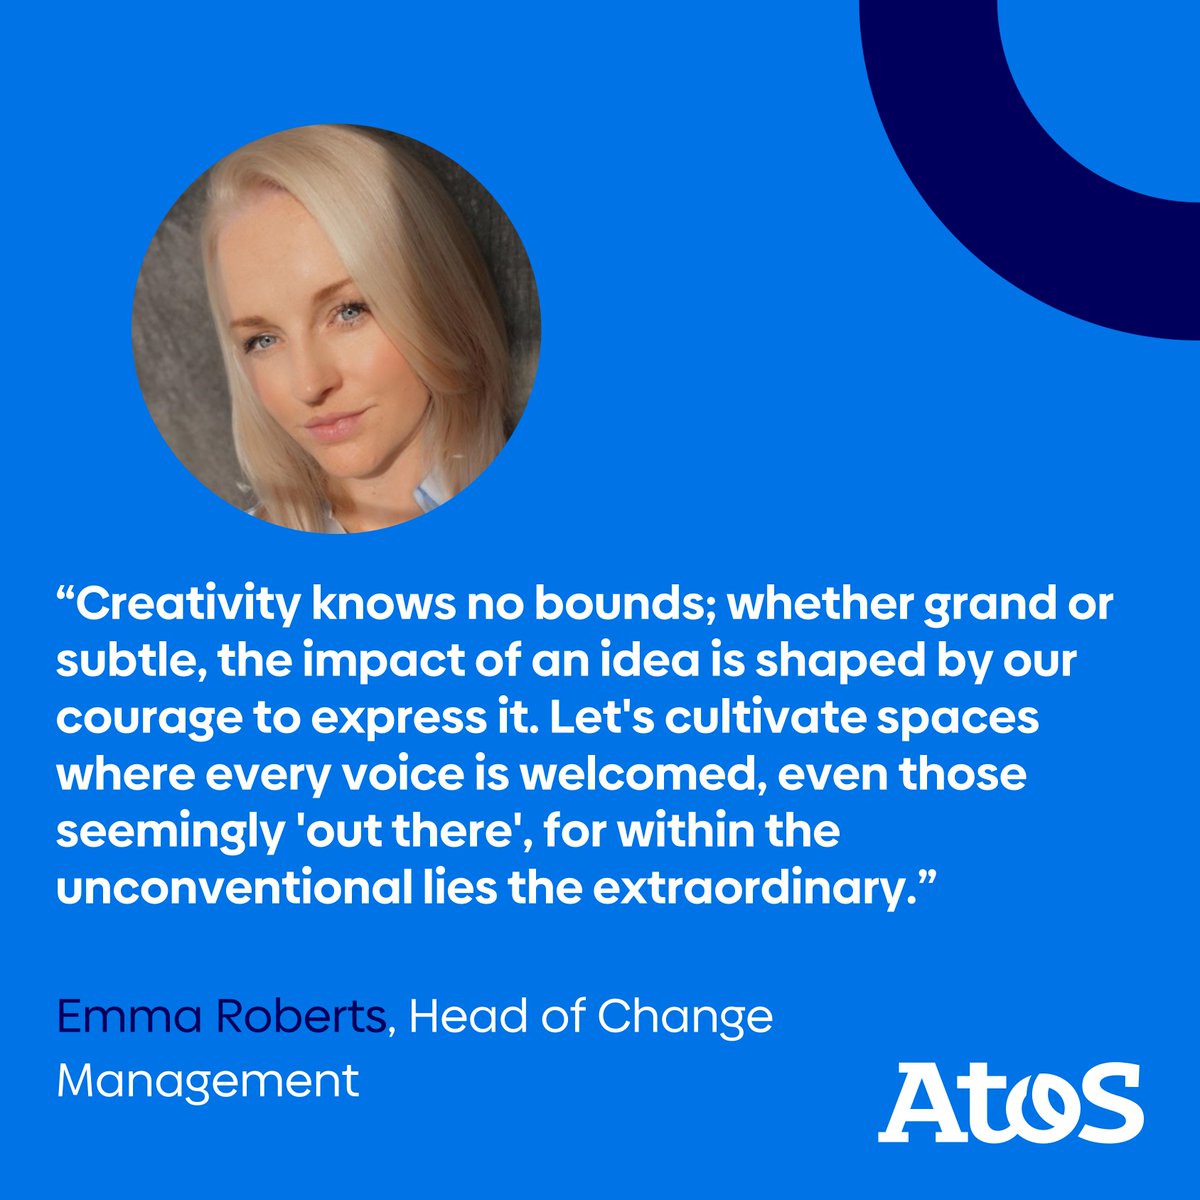 🎨💡 Join @Atos in celebrating World #Creativity & #Innovation Week! 🚀 
Get inspired by our advocates' insights on what #creativityandinnovation mean to them personally & professionally. Stay tuned for transformative insights!
#IAmCreative #StayCreative 
CC @WorldCreativity